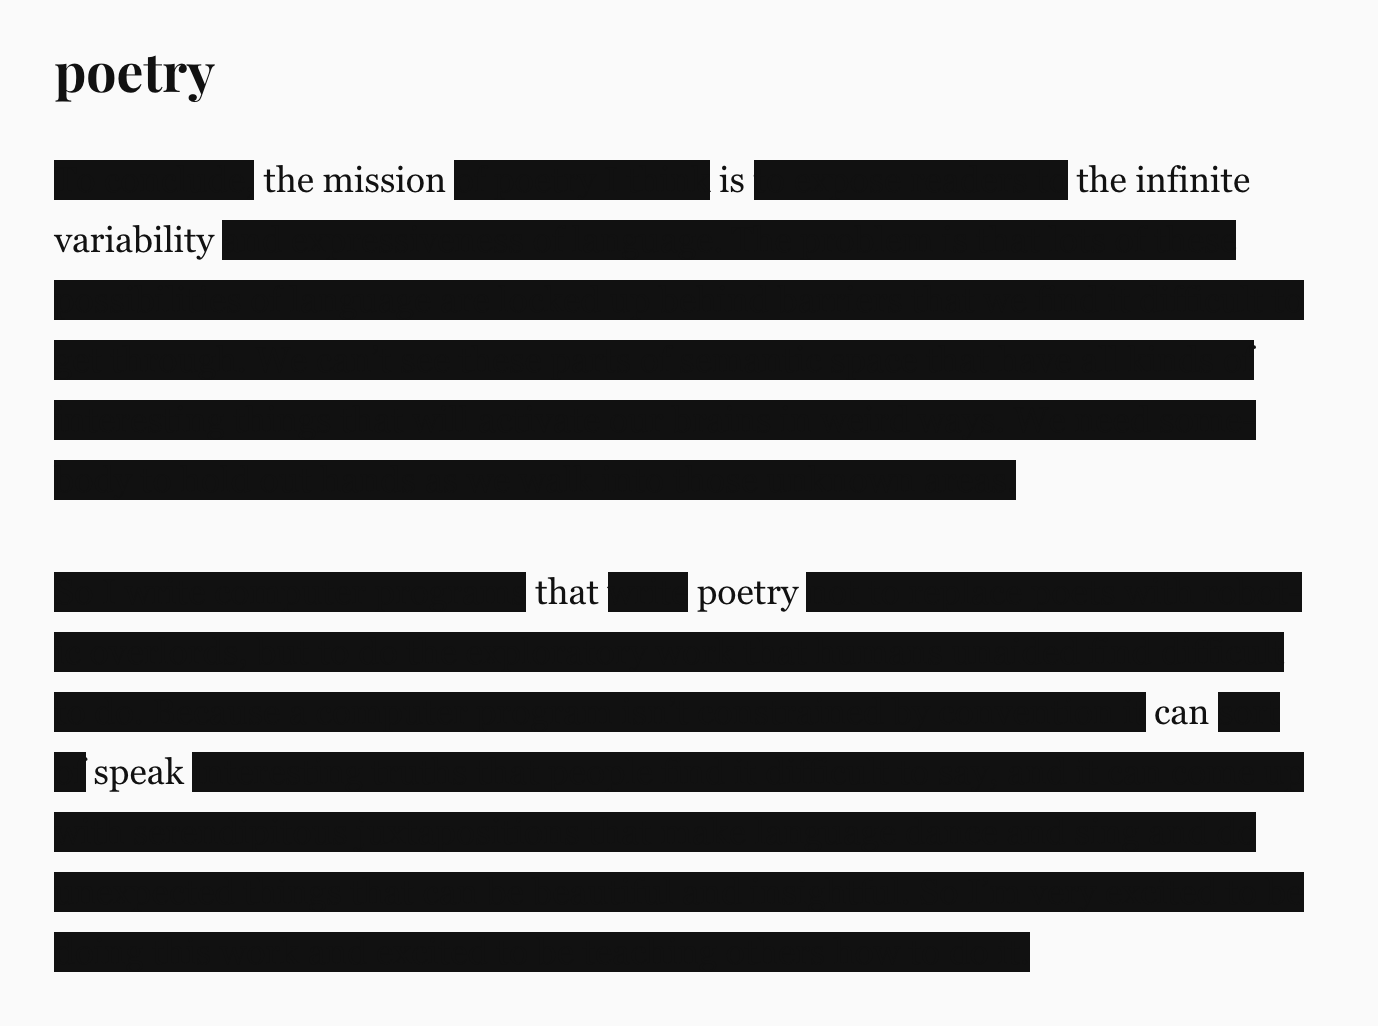 A two-line poem created using Redactionist: “the mission is the infinite variability / that poetry can speak”.